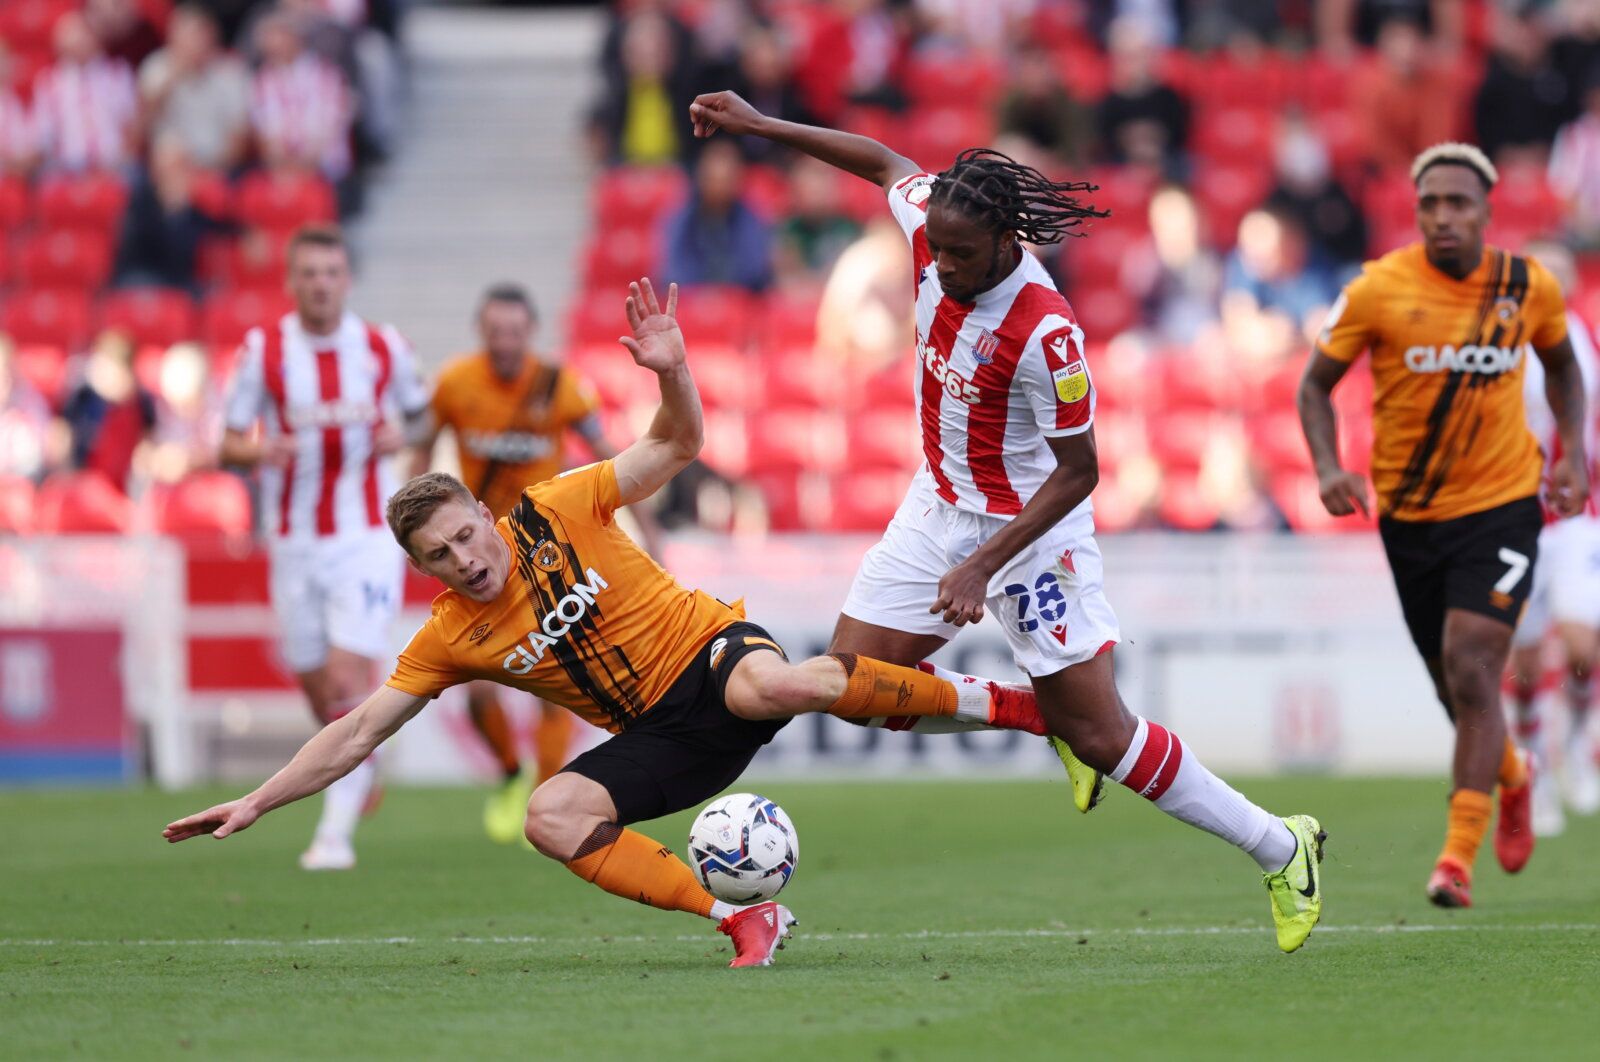 Soccer Football - England - Championship - Stoke City v Hull City - bet365 Stadium, Stoke-on-Trent, Britain - September 25, 2021  Hull City's Greg Docherty in action with Stoke City's Romaine Sawyers  Action Images/John Clifton   EDITORIAL USE ONLY. No use with unauthorized audio, video, data, fixture lists, club/league logos or 